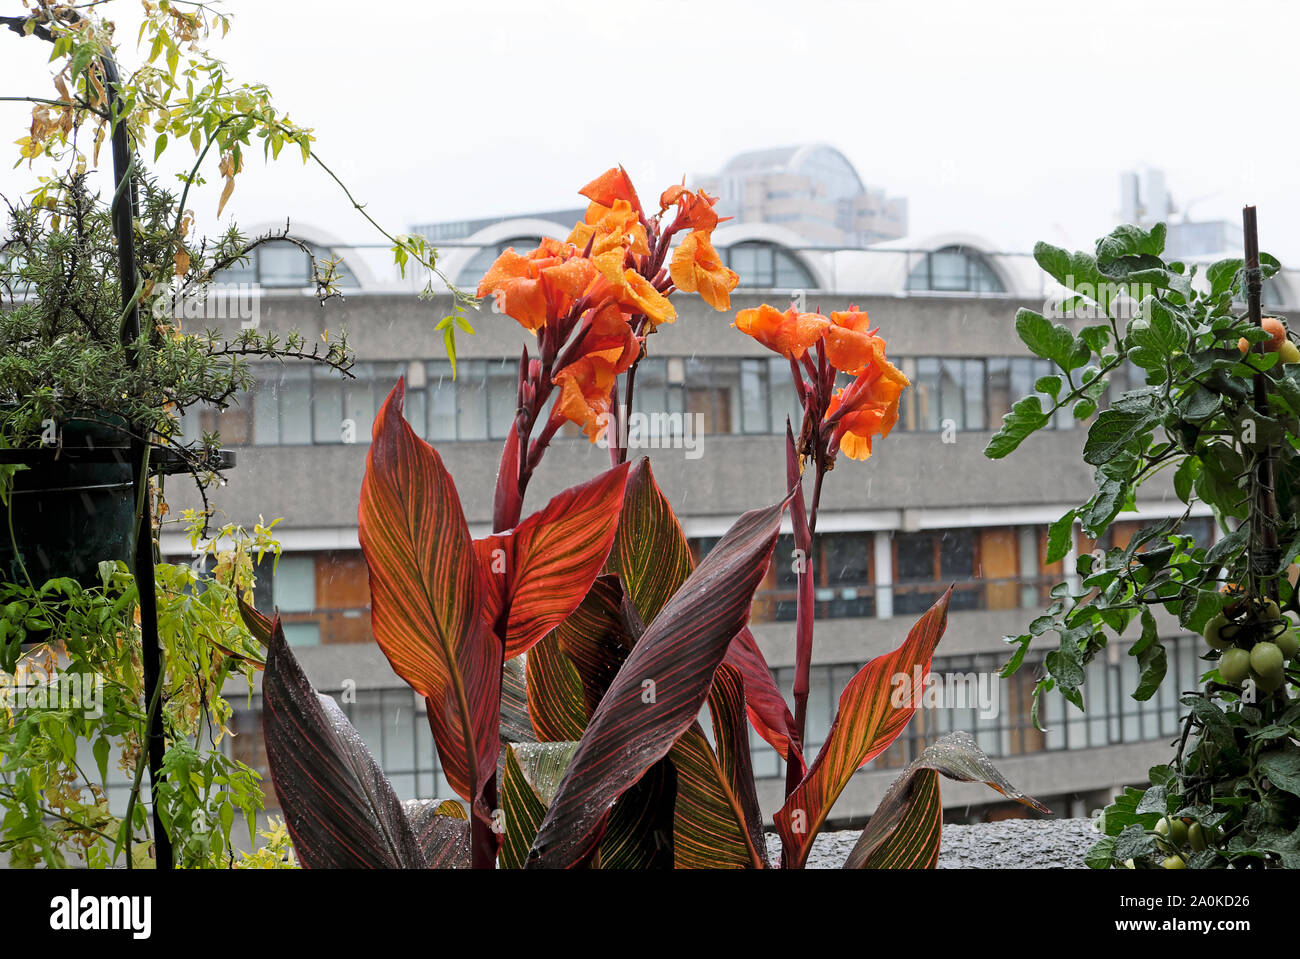 Orange Canna Phasion lily plants, plant growing in planters on the balcony of a Barbican Estate flat in the City of London  KATHY DEWITT Stock Photo